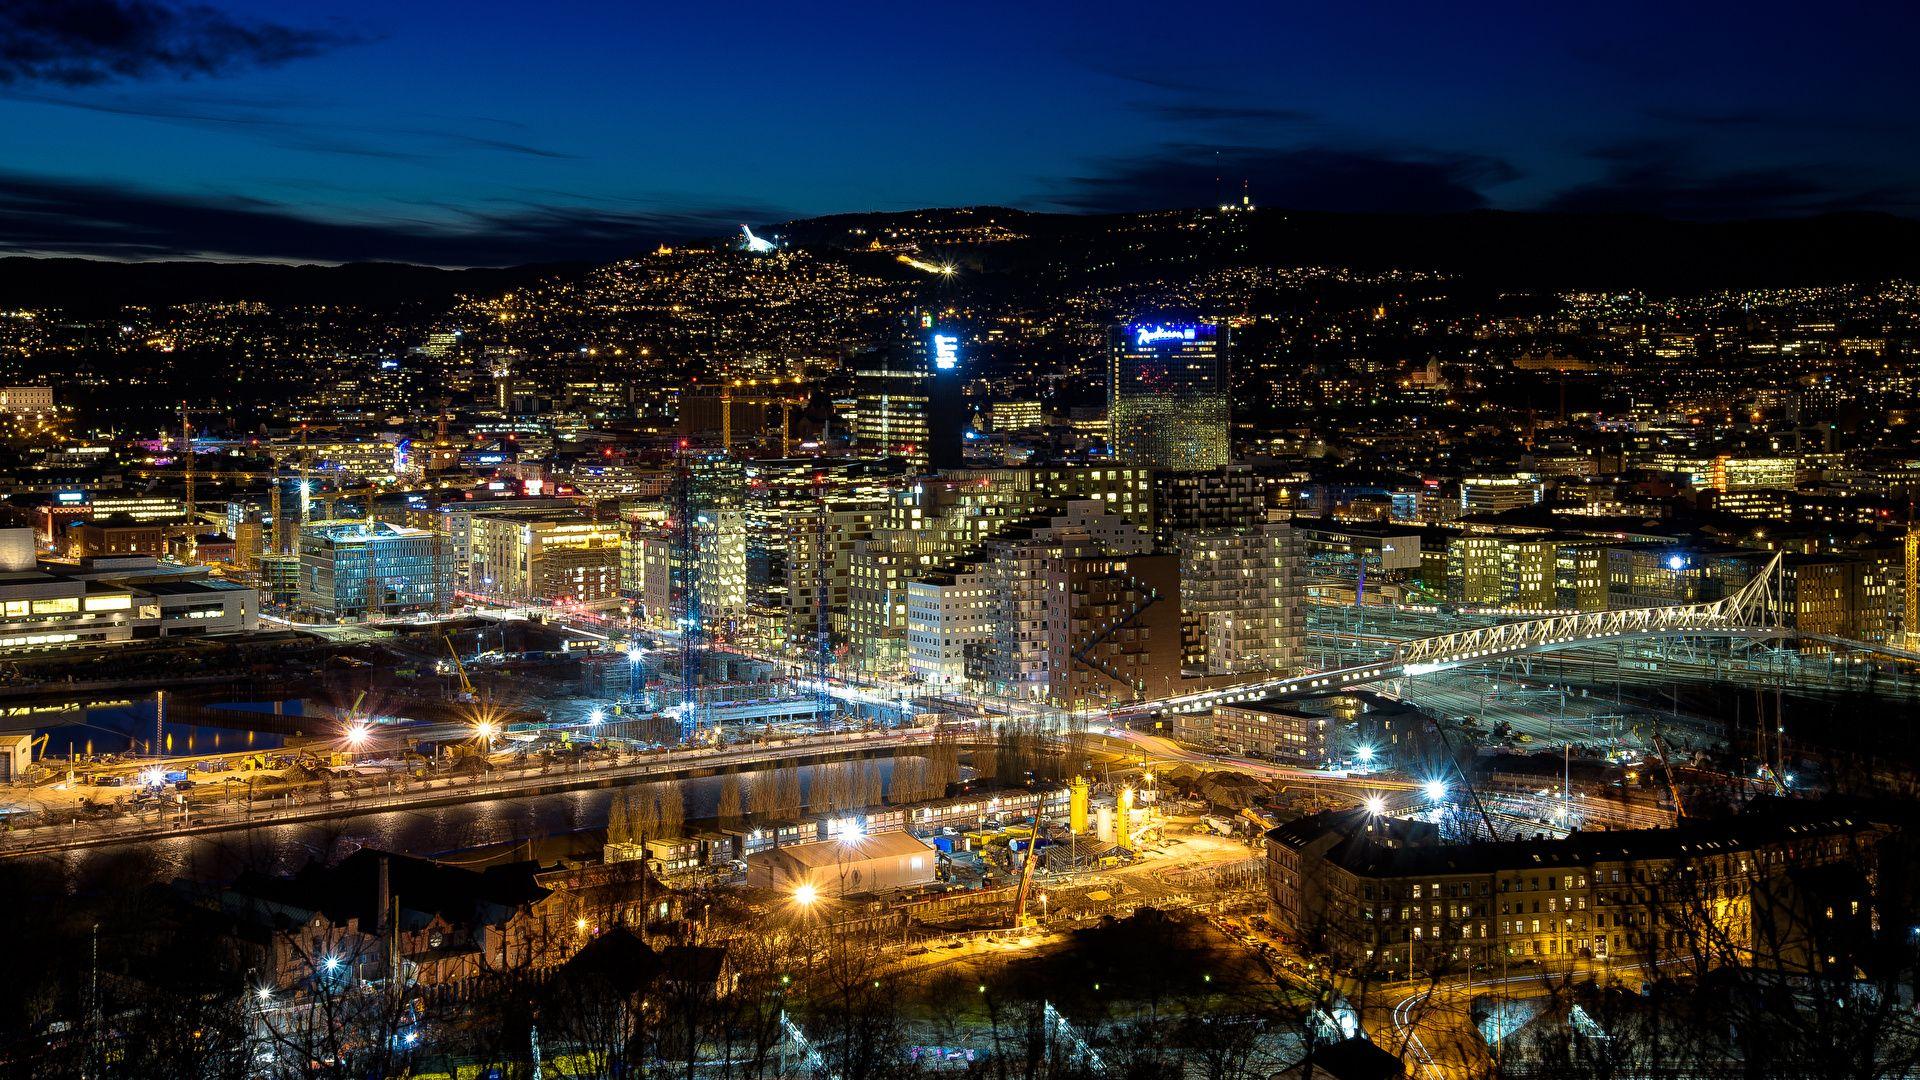 Wallpaper Norway Megalopolis Oslo night time Cities 1920x1080